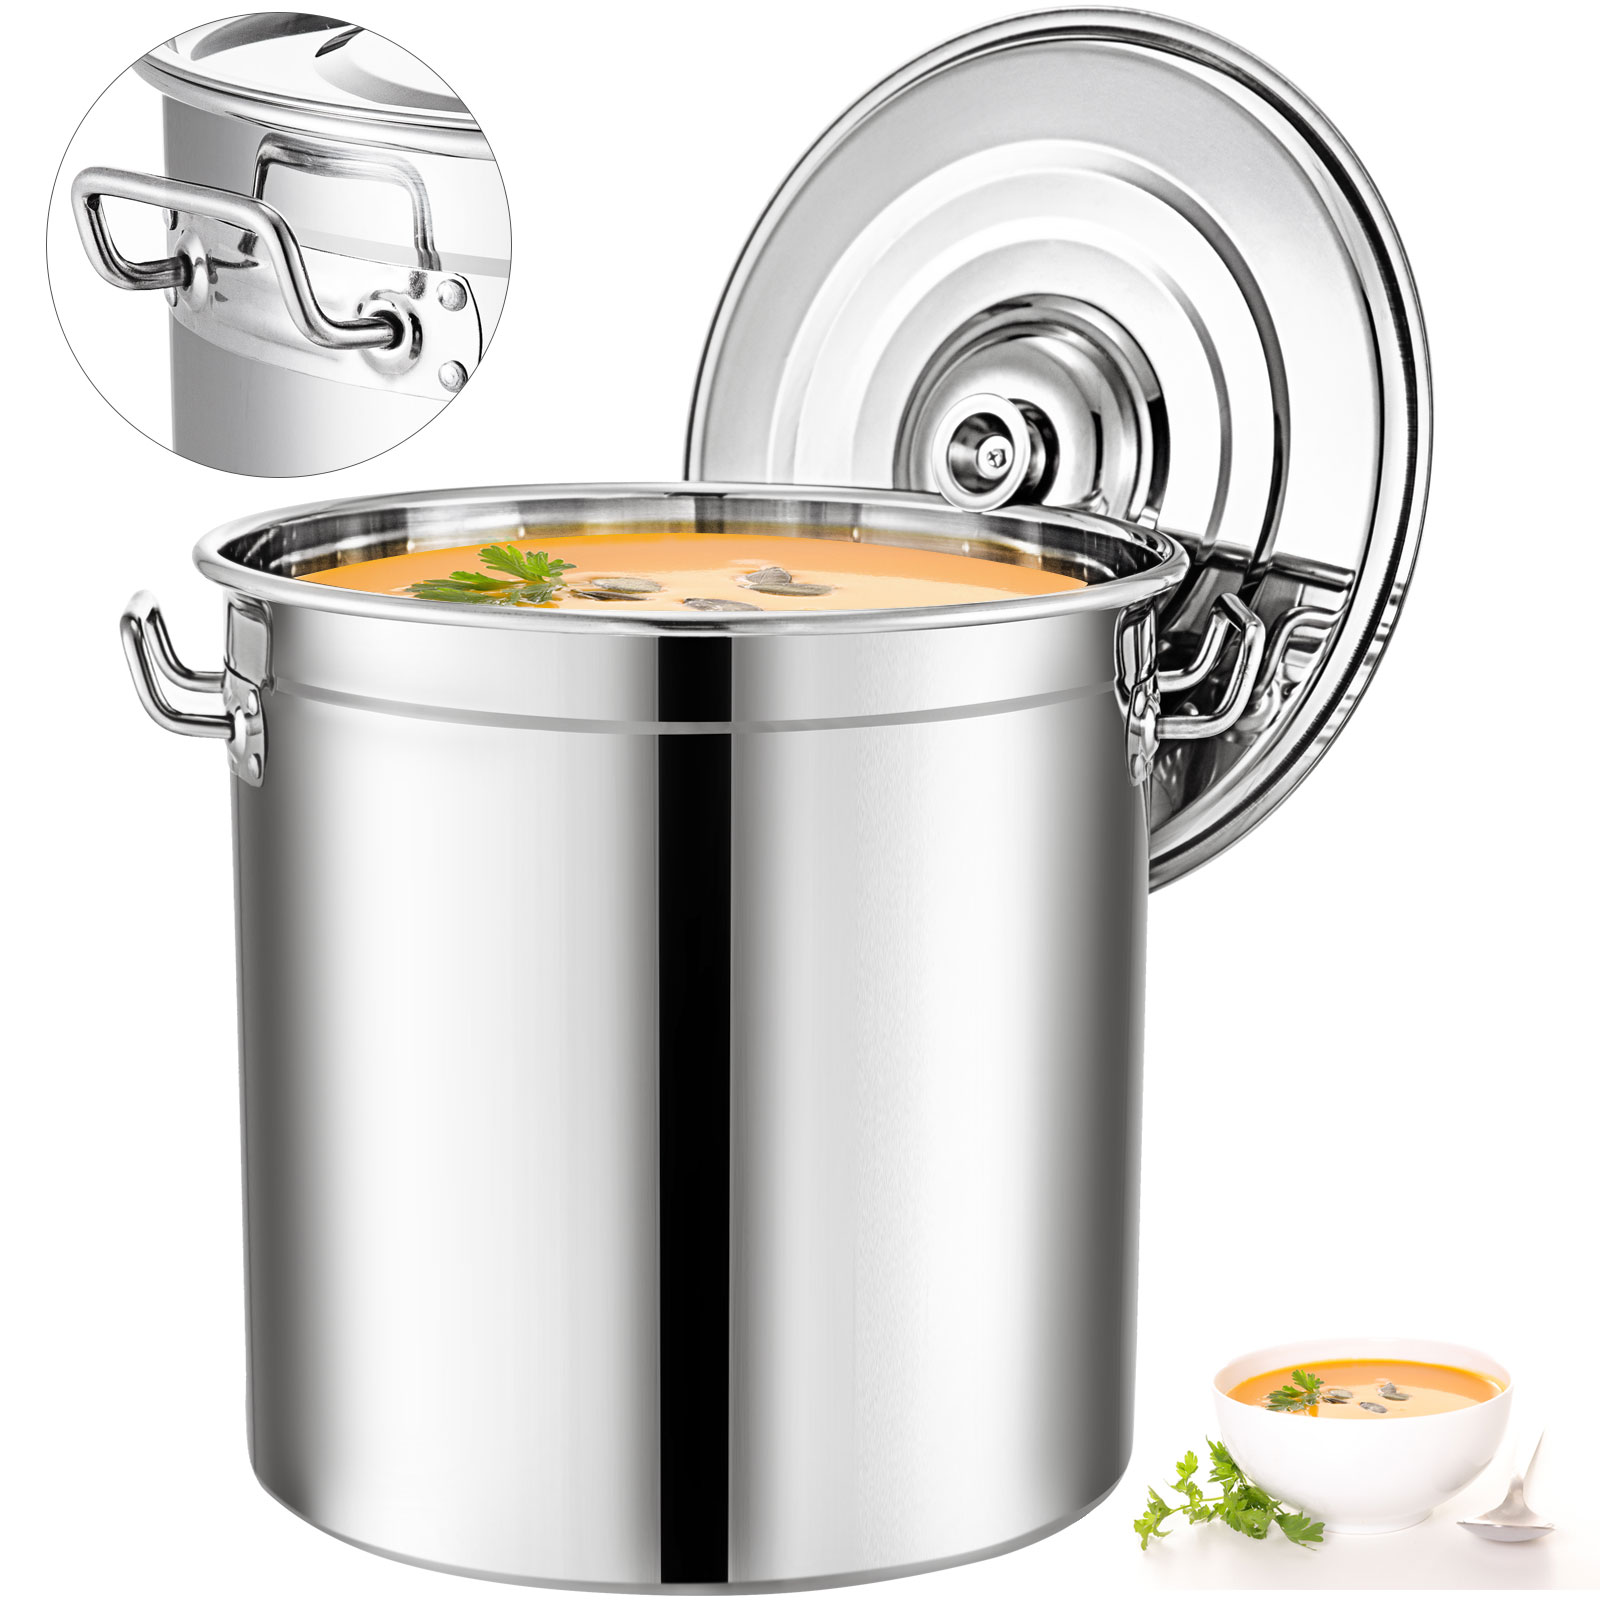 Vevor 90l Stainless Steel Home Brew Kettle Brewing Stock Pot Beer от Vevor Many GEOs